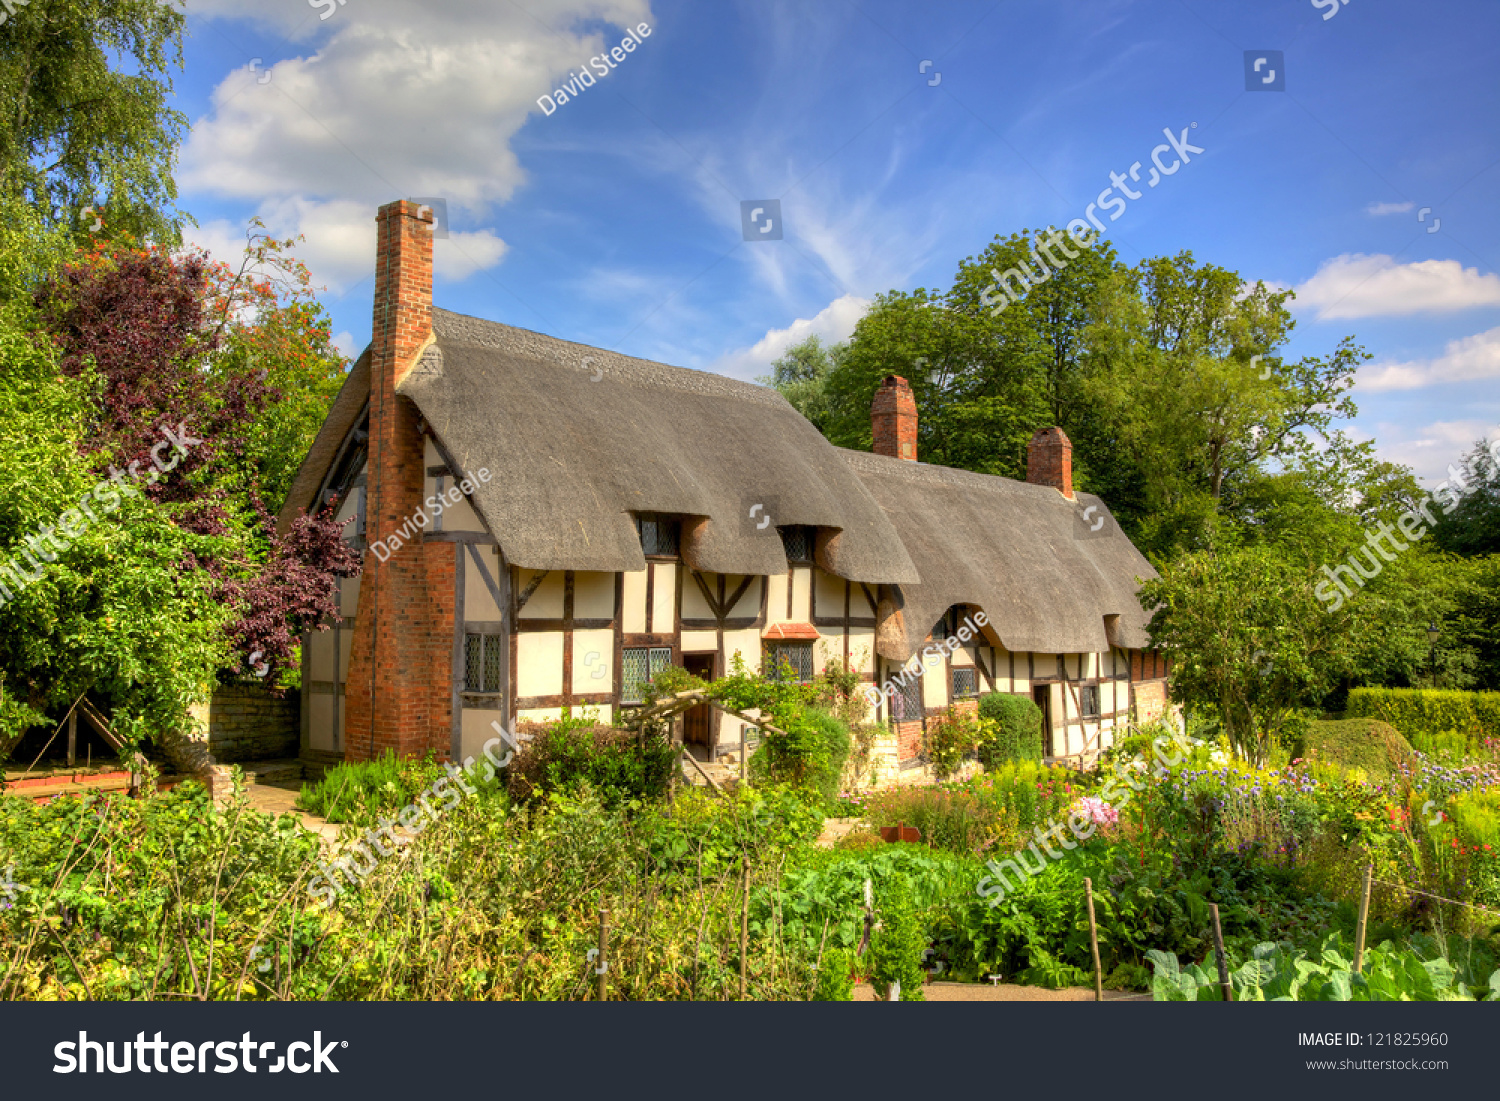 Anne Hathaway's (William Shakespeare's wife) famous thatched cottage and garden at Shottery, just outside Stratford upon Avon, England. #121825960